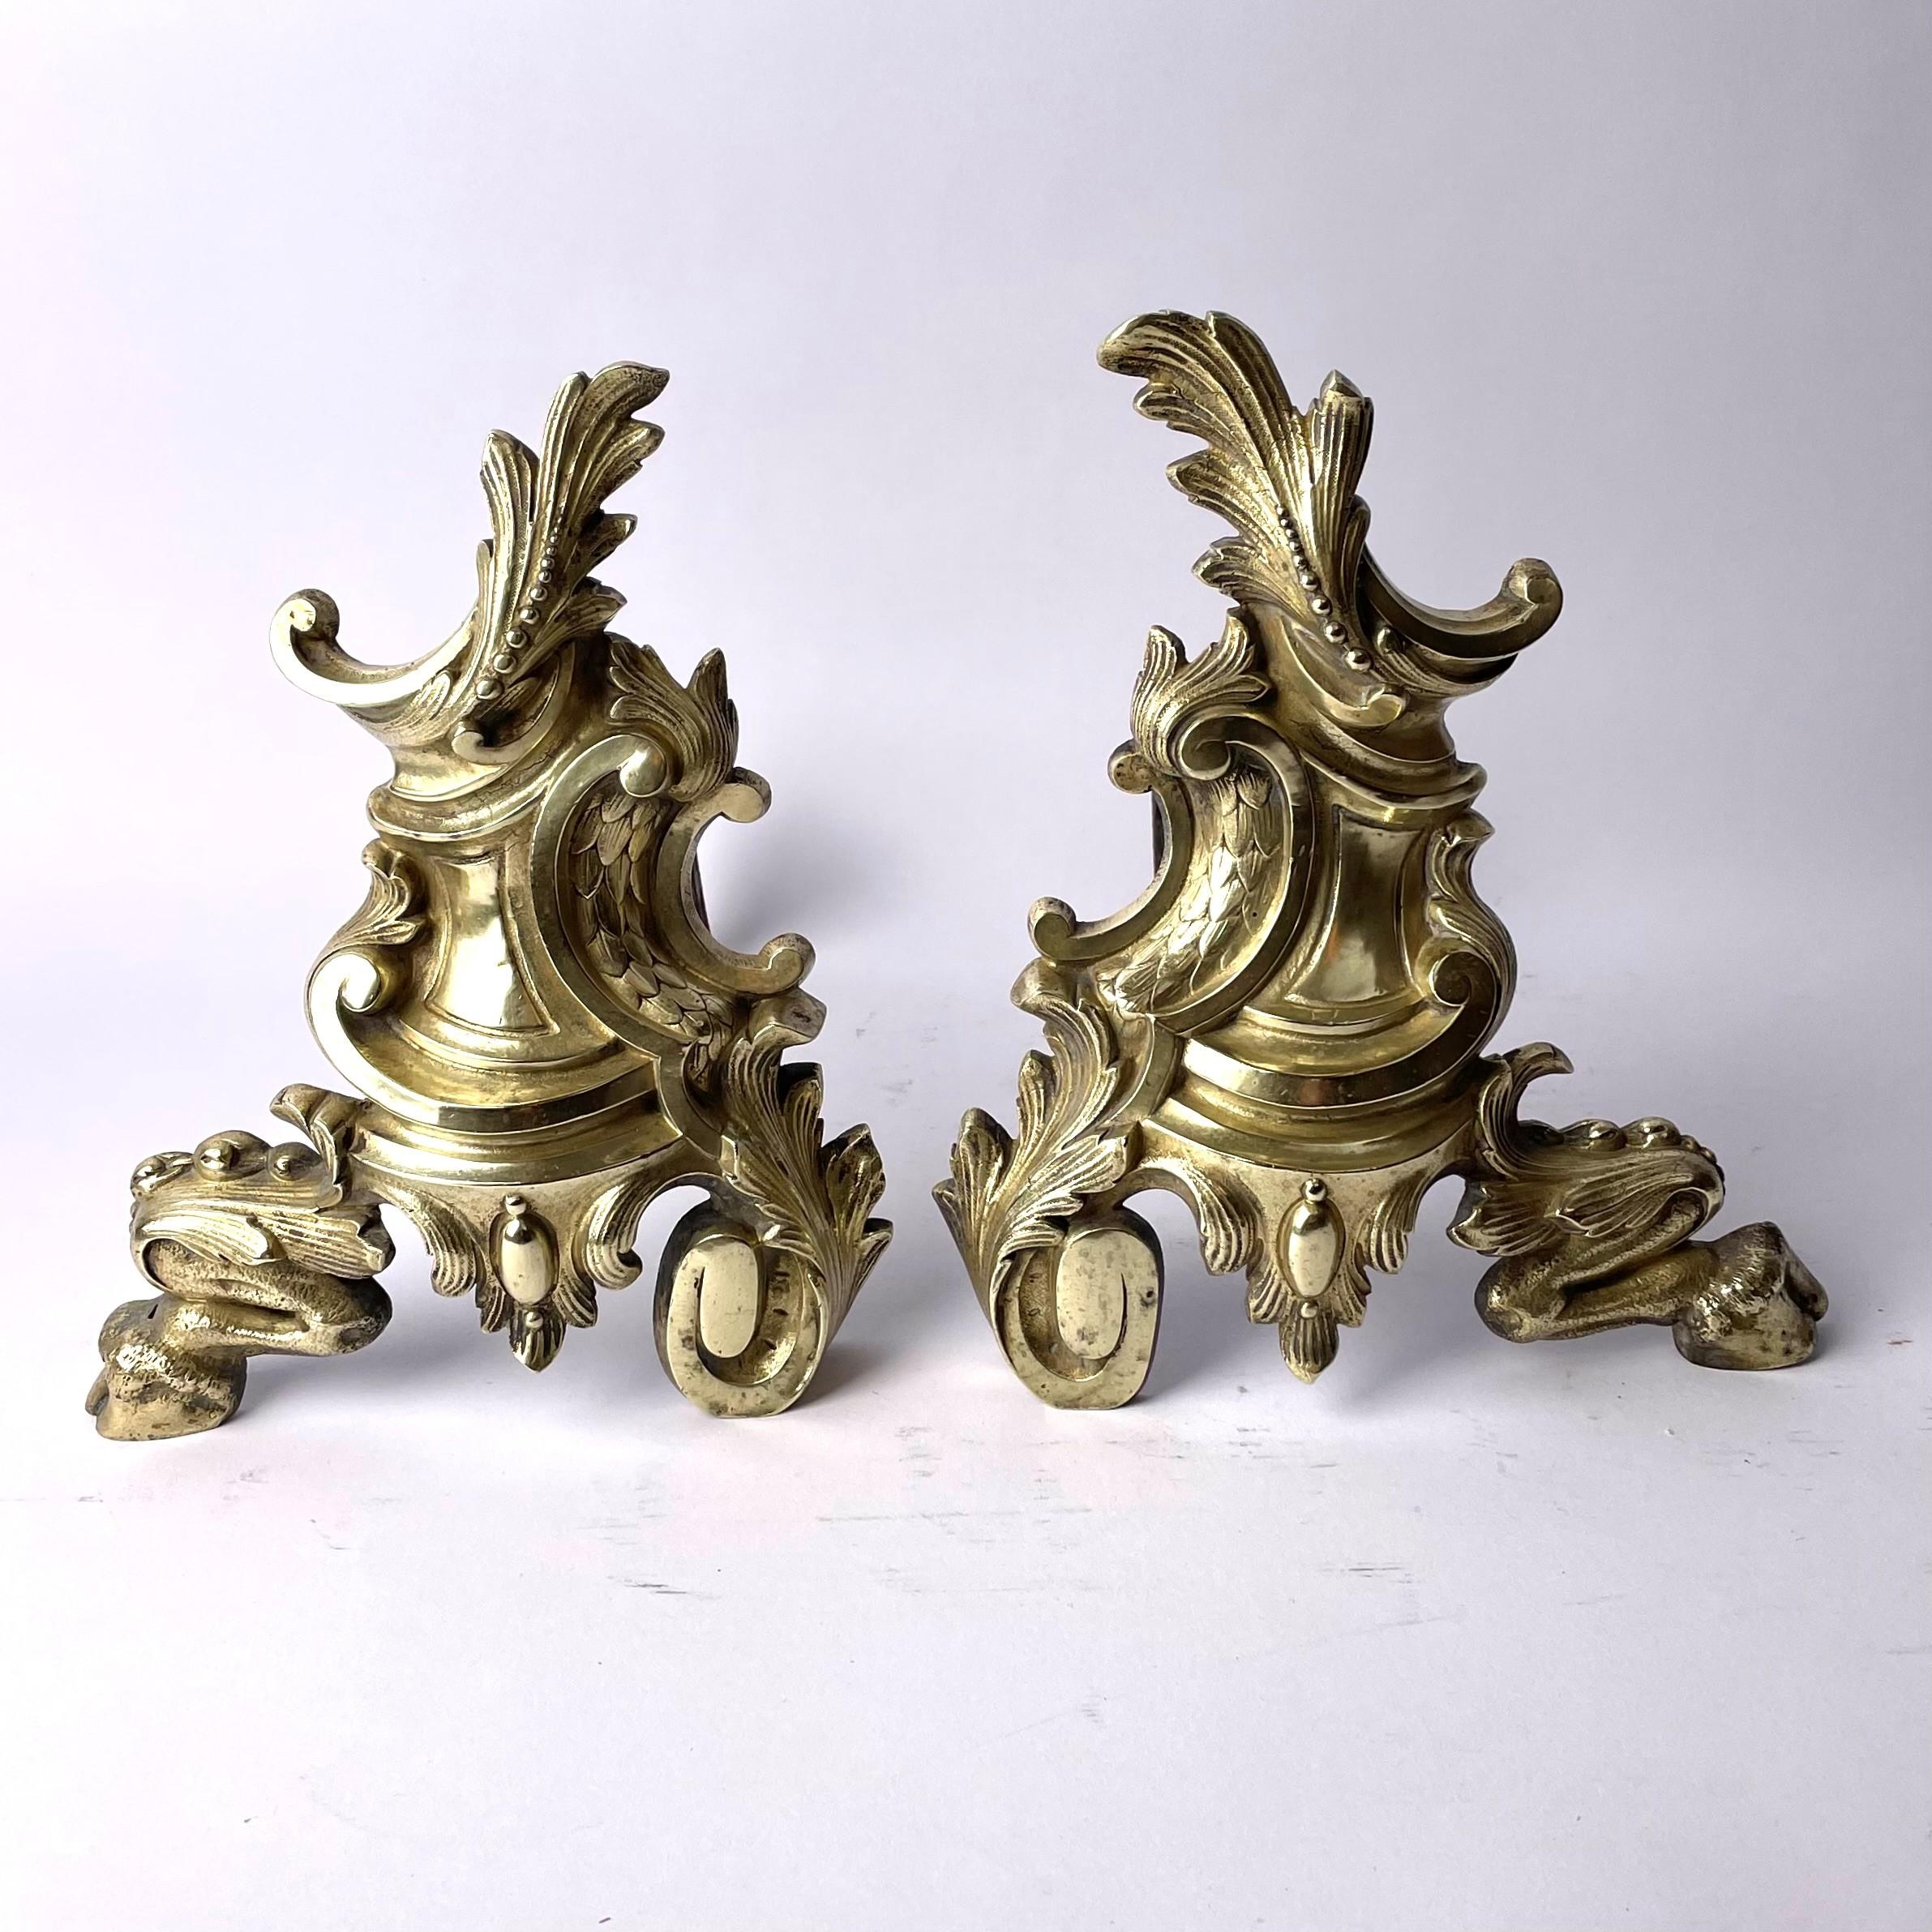 A beautiful pair of Louis XV style Chenets from the late 19th century. Made in bronze and iron.


Wear consistent with age and use.